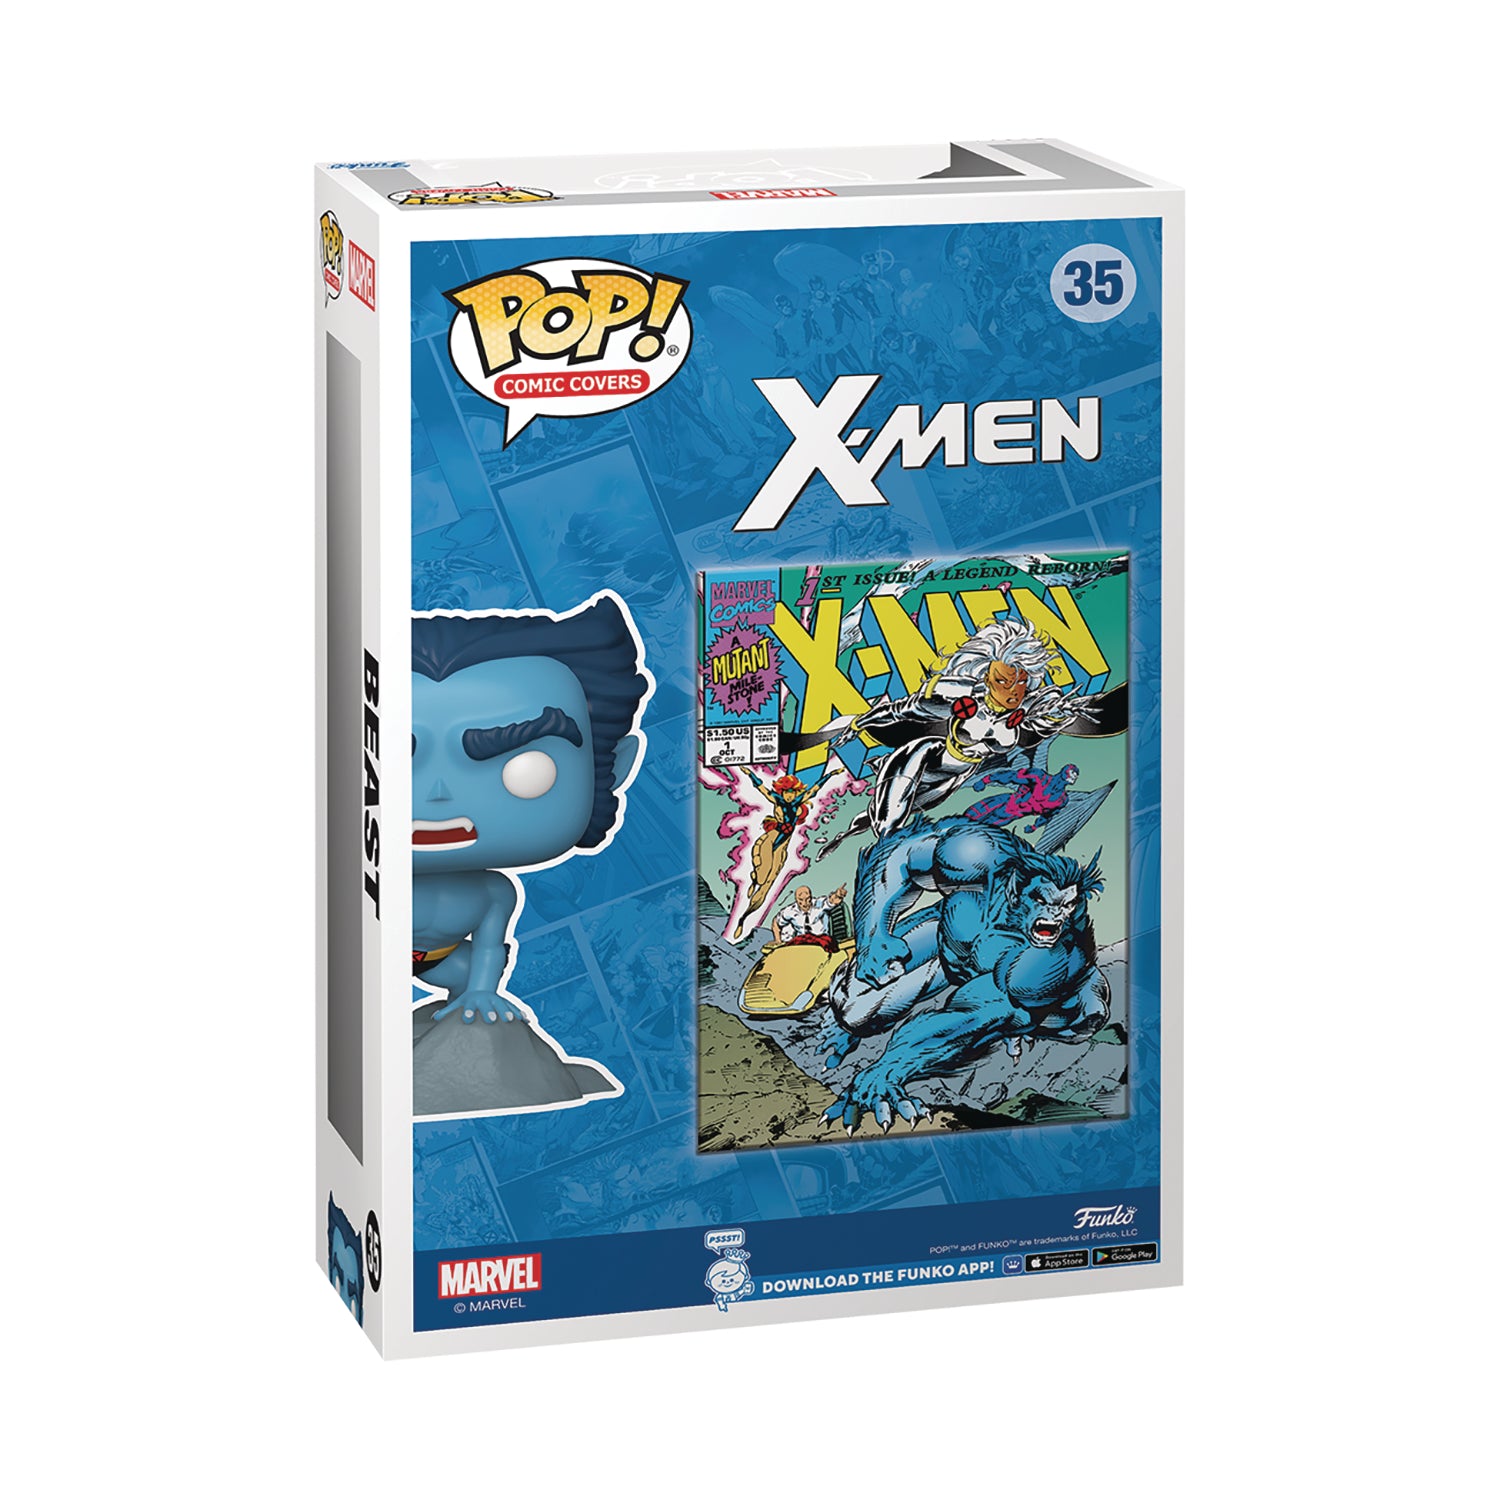 X-Men #1 (1991) Beast Pop! Comic Cover Vinyl Figure with Case - Previews Exclusive - State of Comics